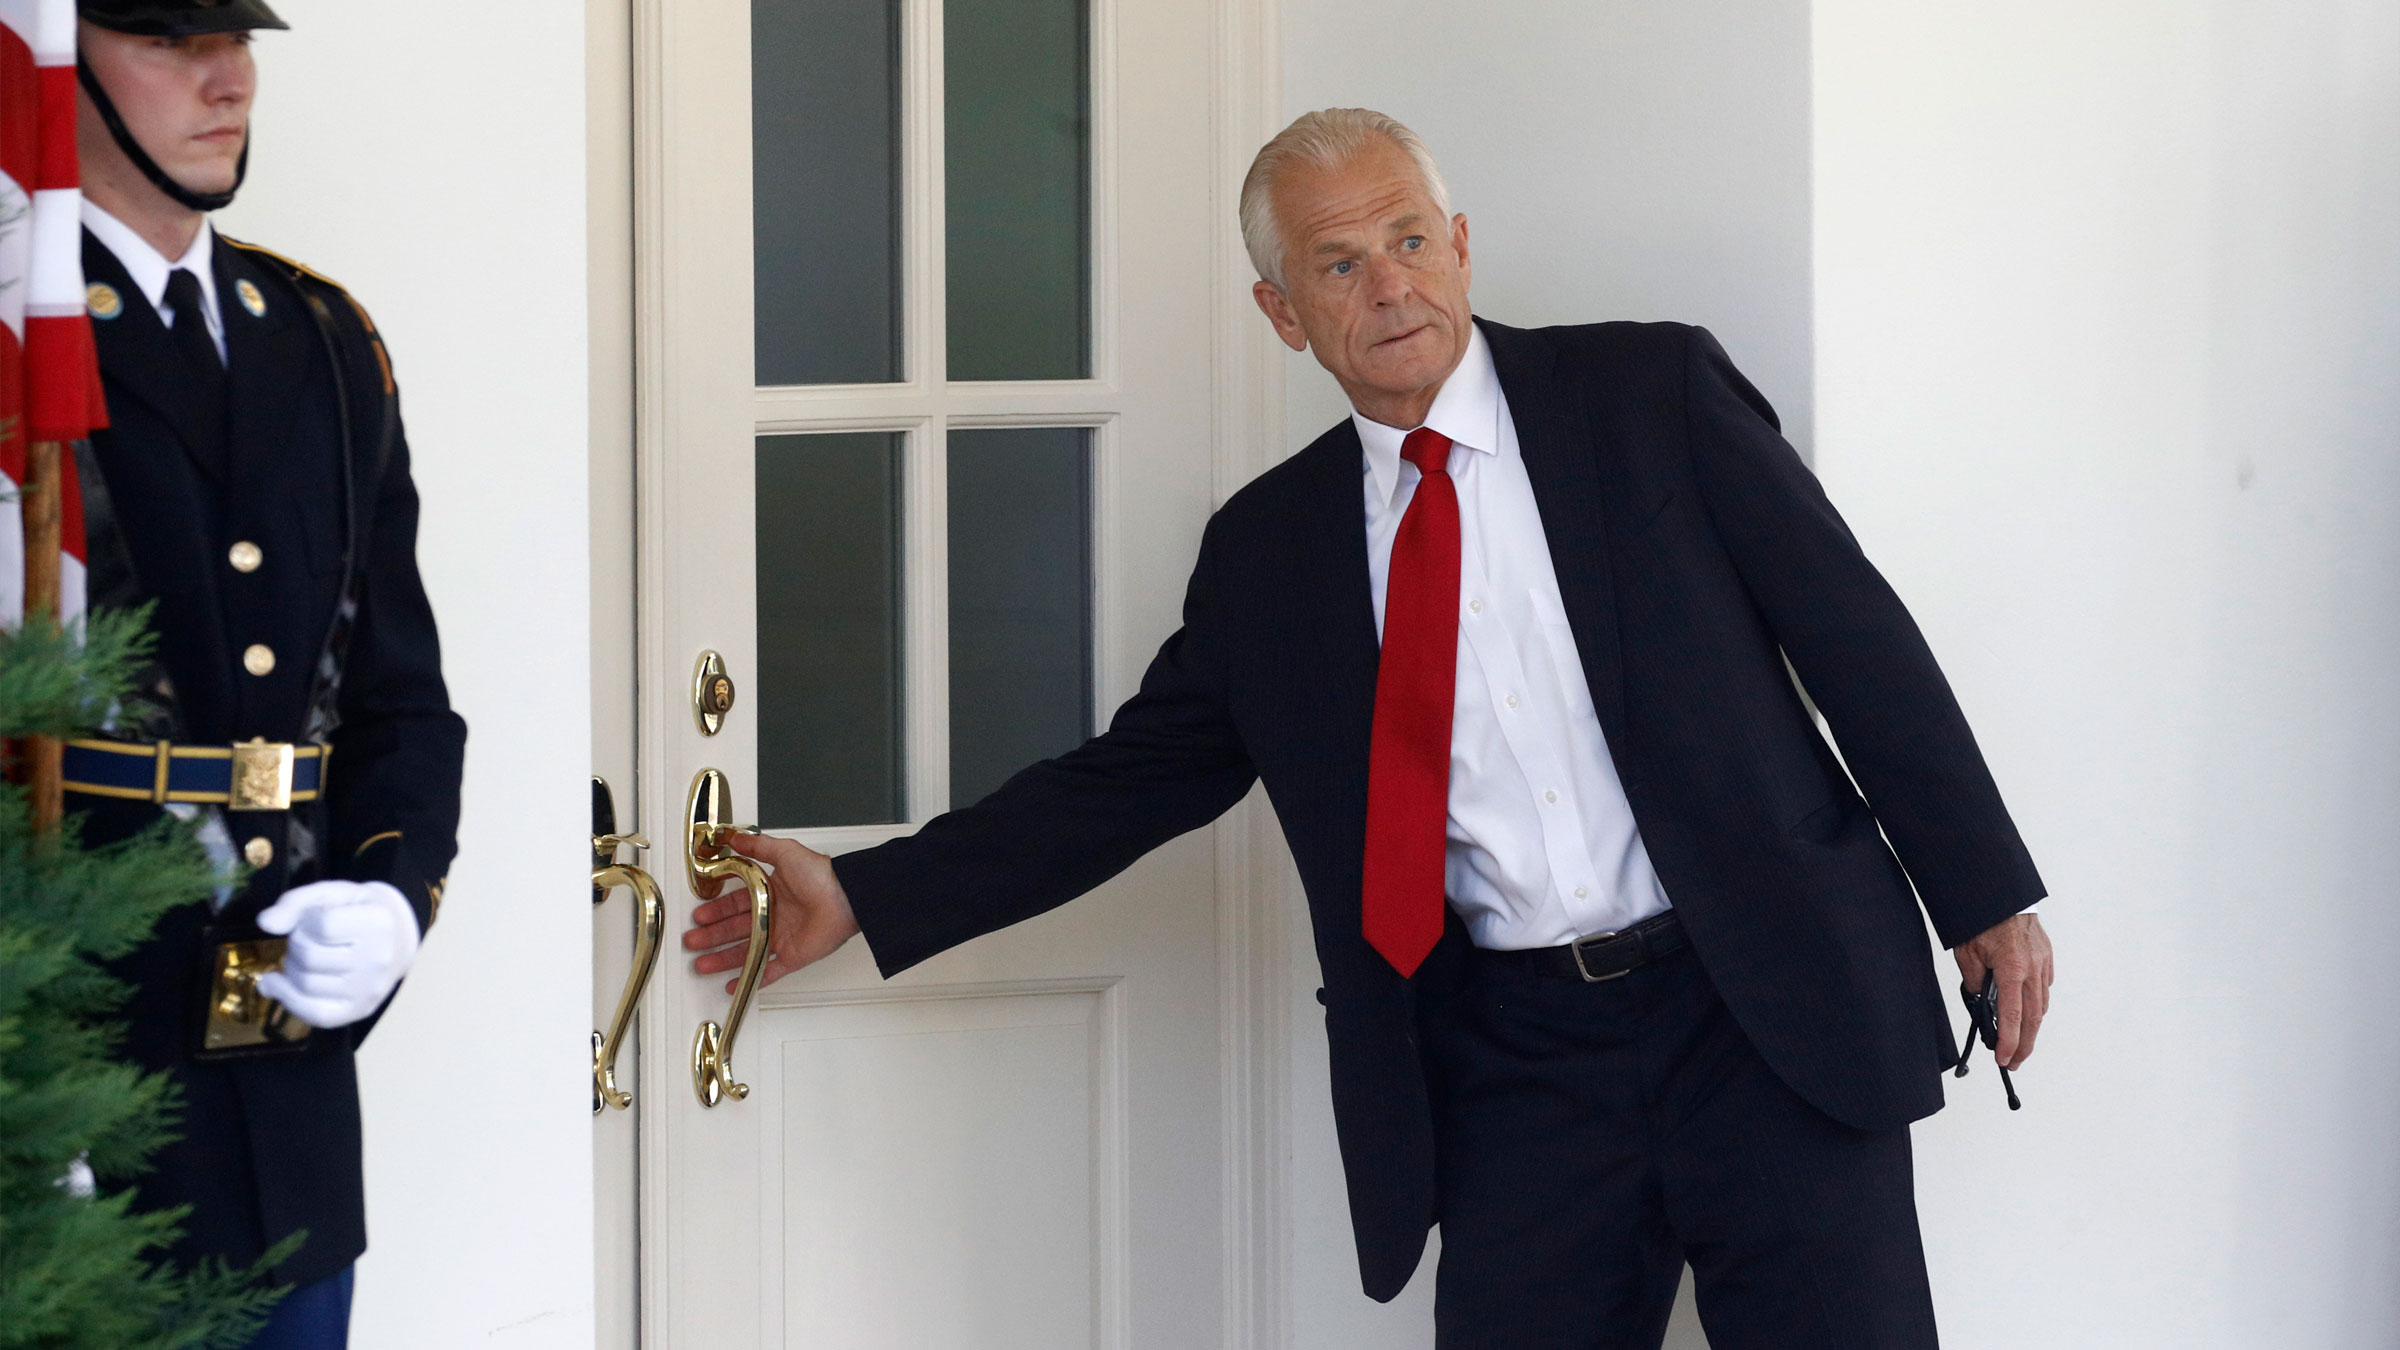 White House trade adviser Peter Navarro enters the West Wing of the White House on July 8.